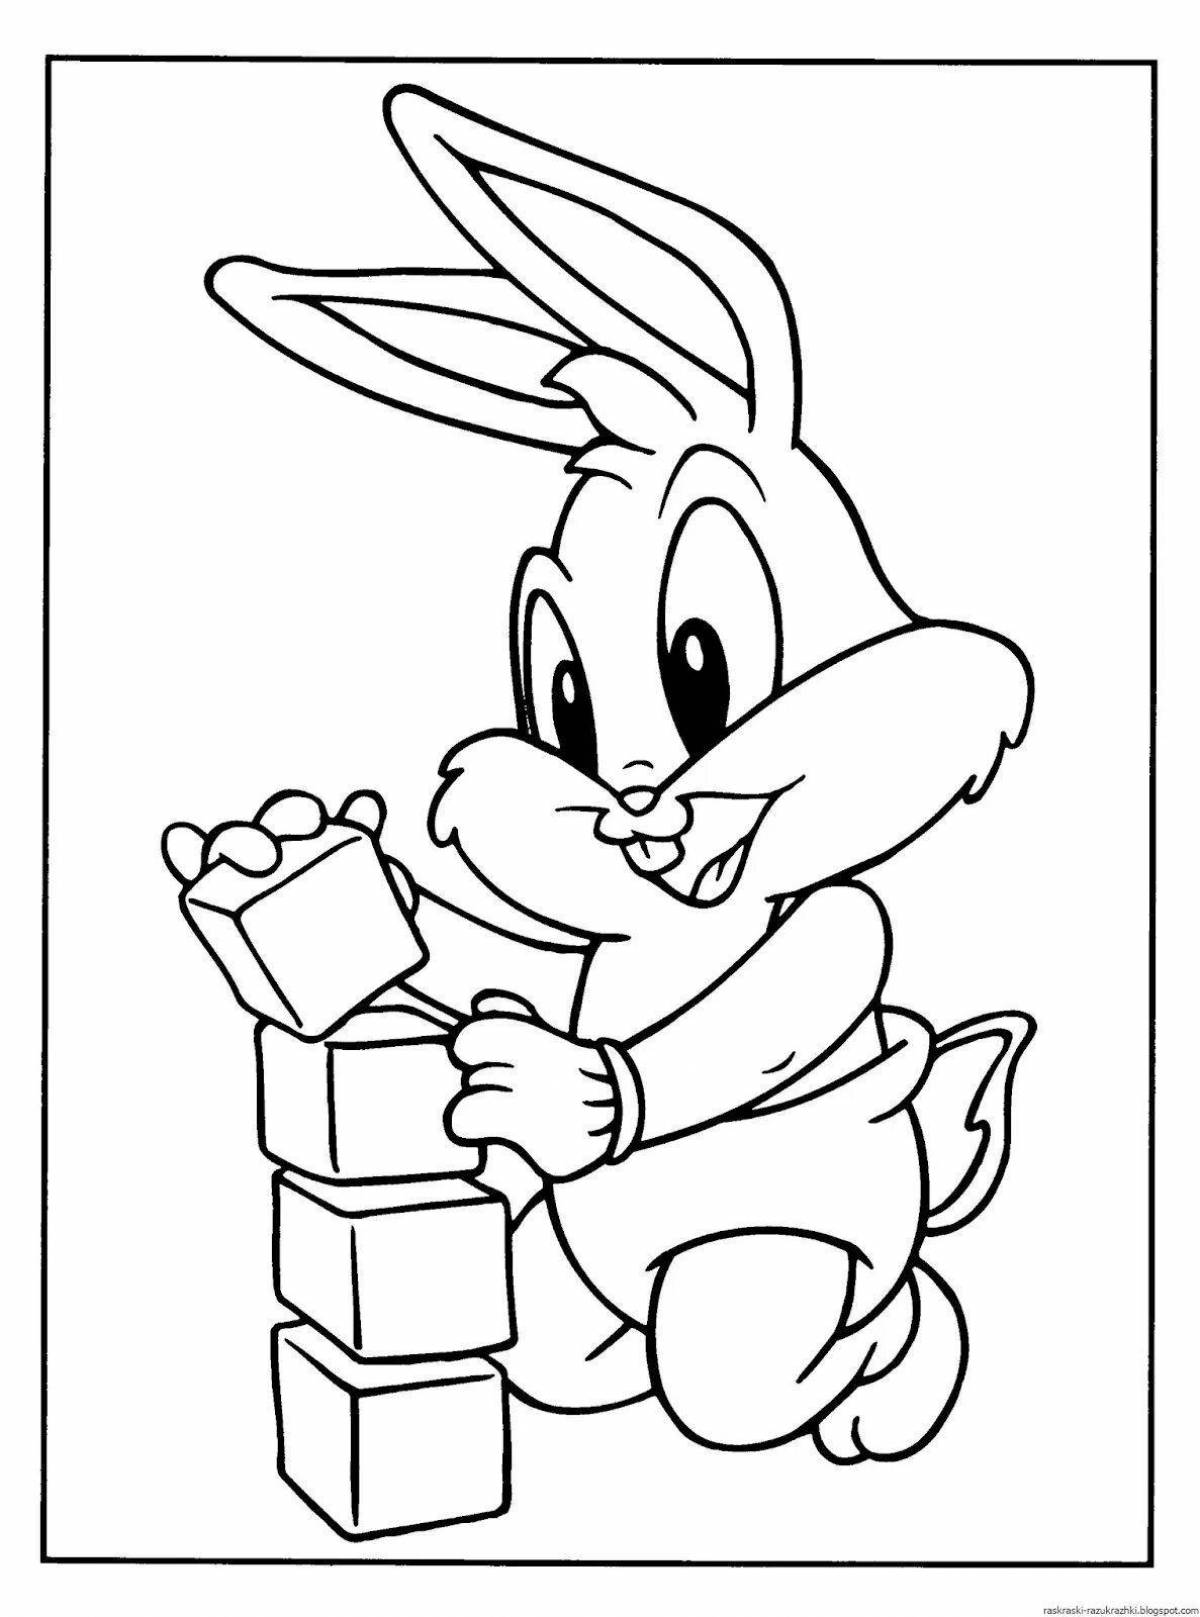 Fun cartoon coloring book for 4-5 year olds